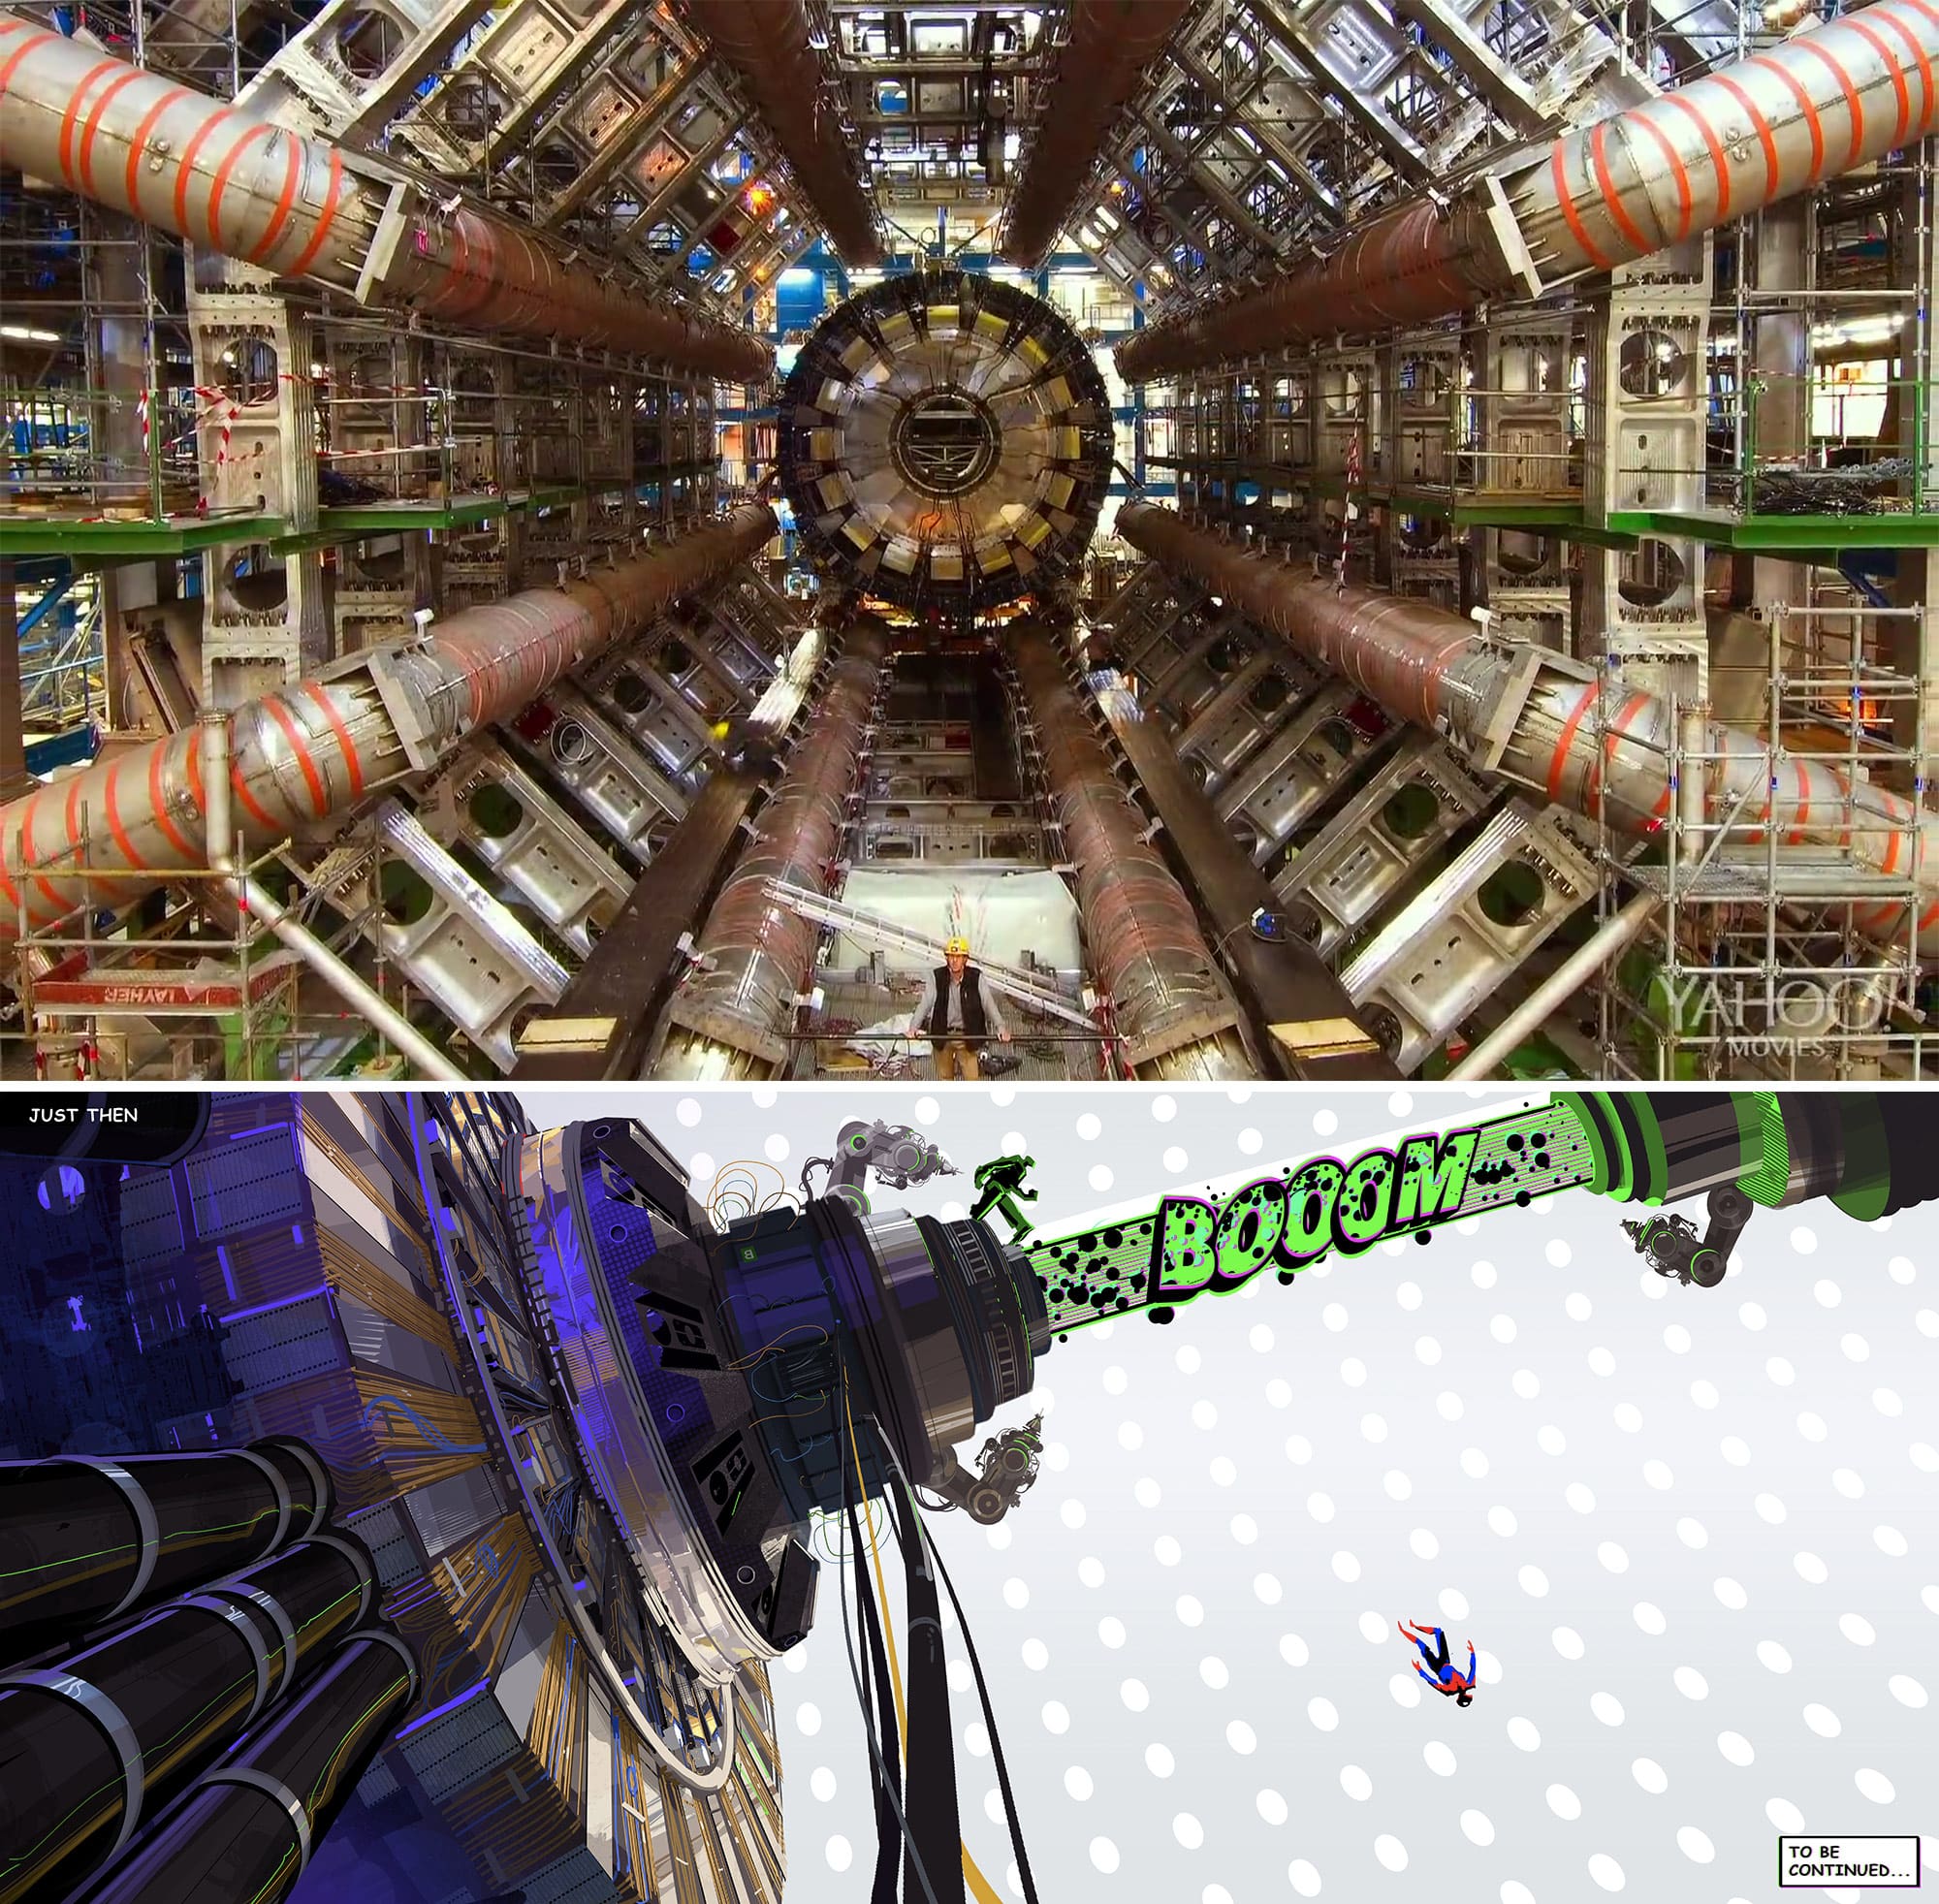 Women scientists in documentaries like "Particle Fever" (top) inspired the character of Doc Ock and the visual imagery of the technology in the film, as seen in the bottom concept painting by Patrick O'Keefe.